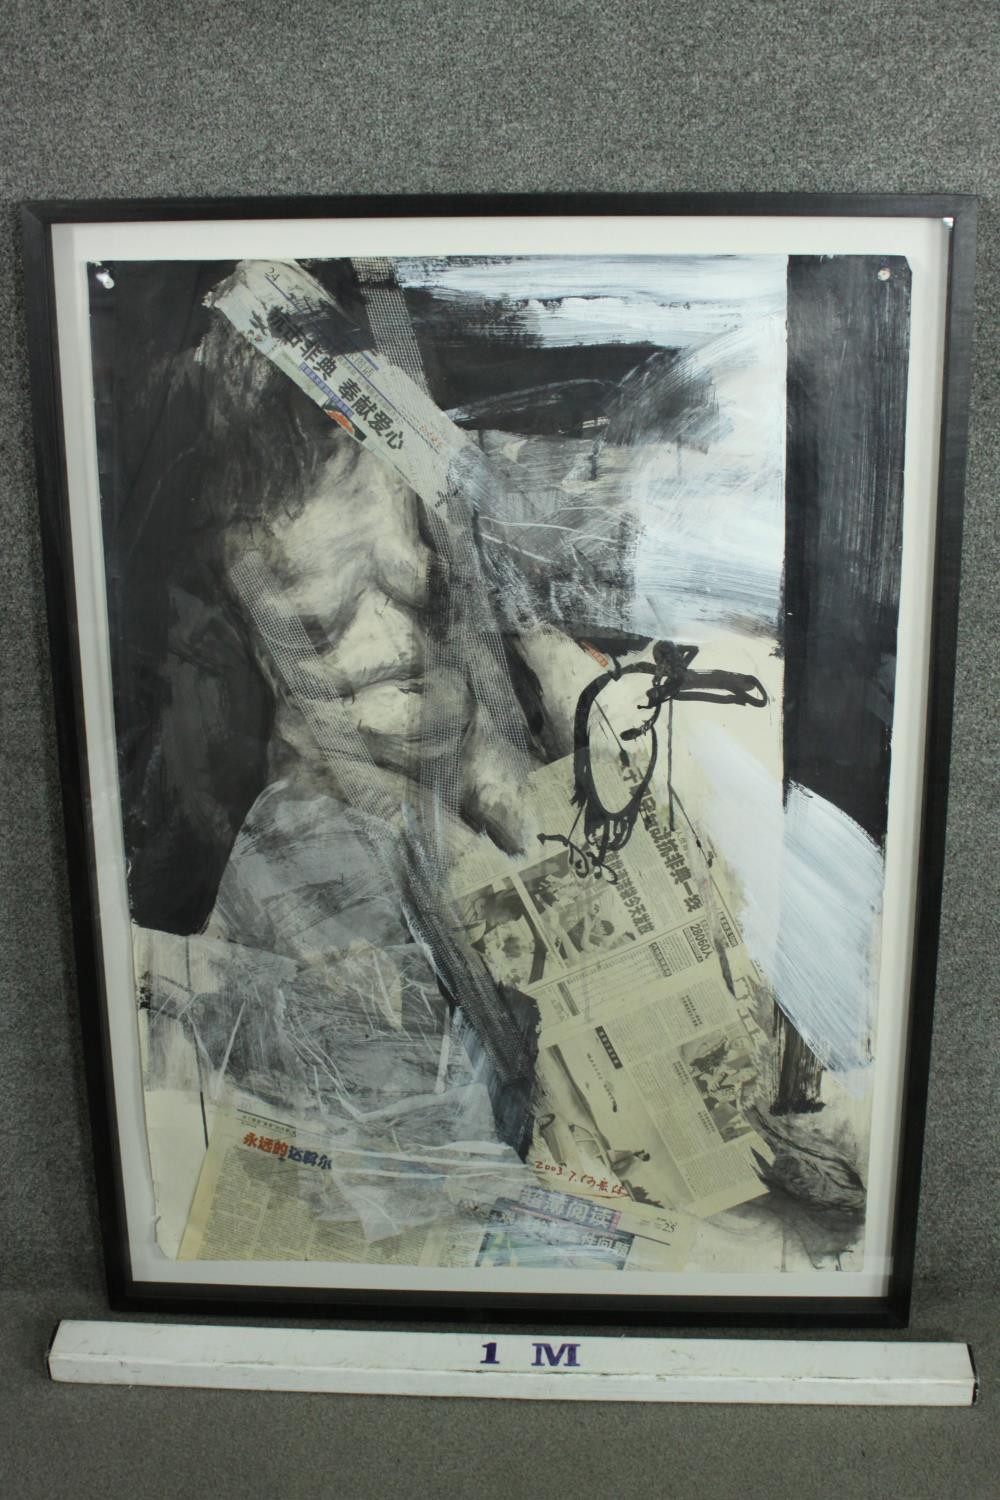 He Hong Wei, 1971, "Untitled" Mixed media on paper, label verso. H.121 W.90cm. - Image 3 of 10